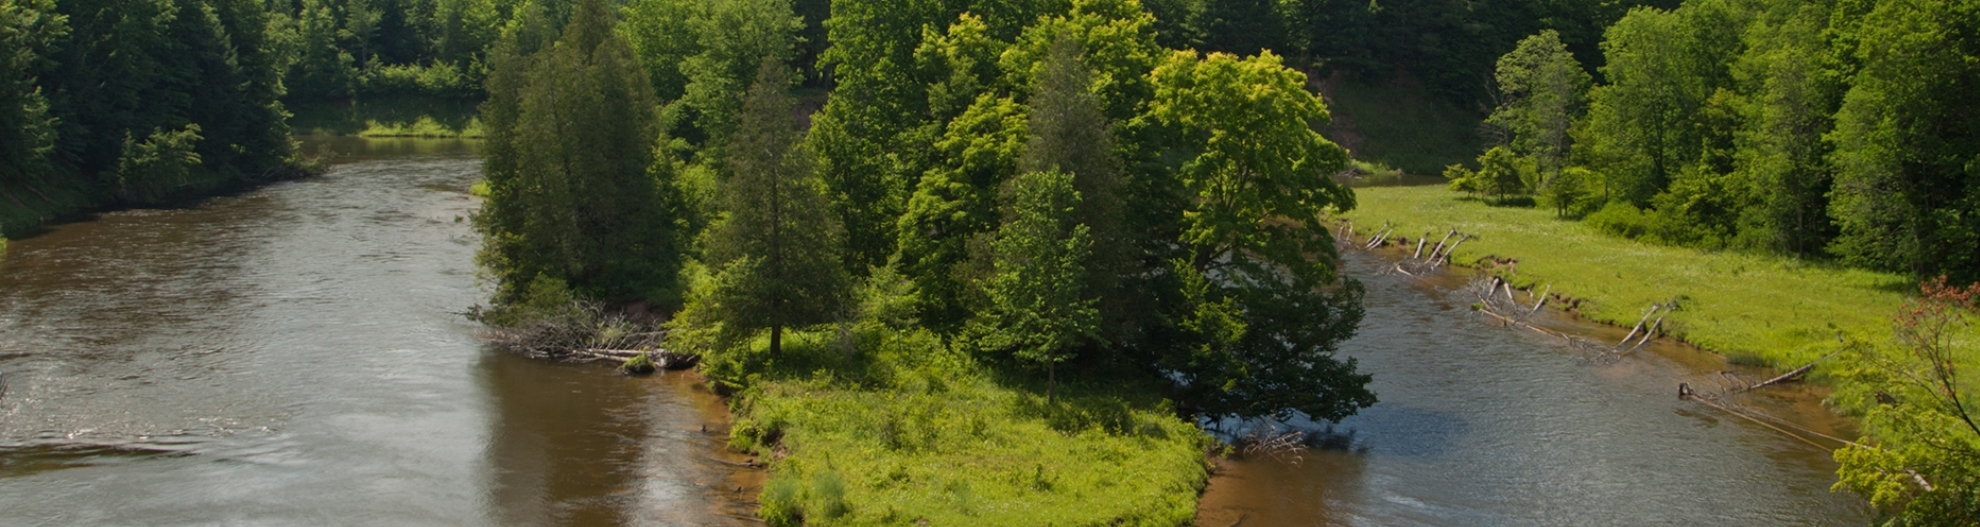 Image of river with lots of foliage